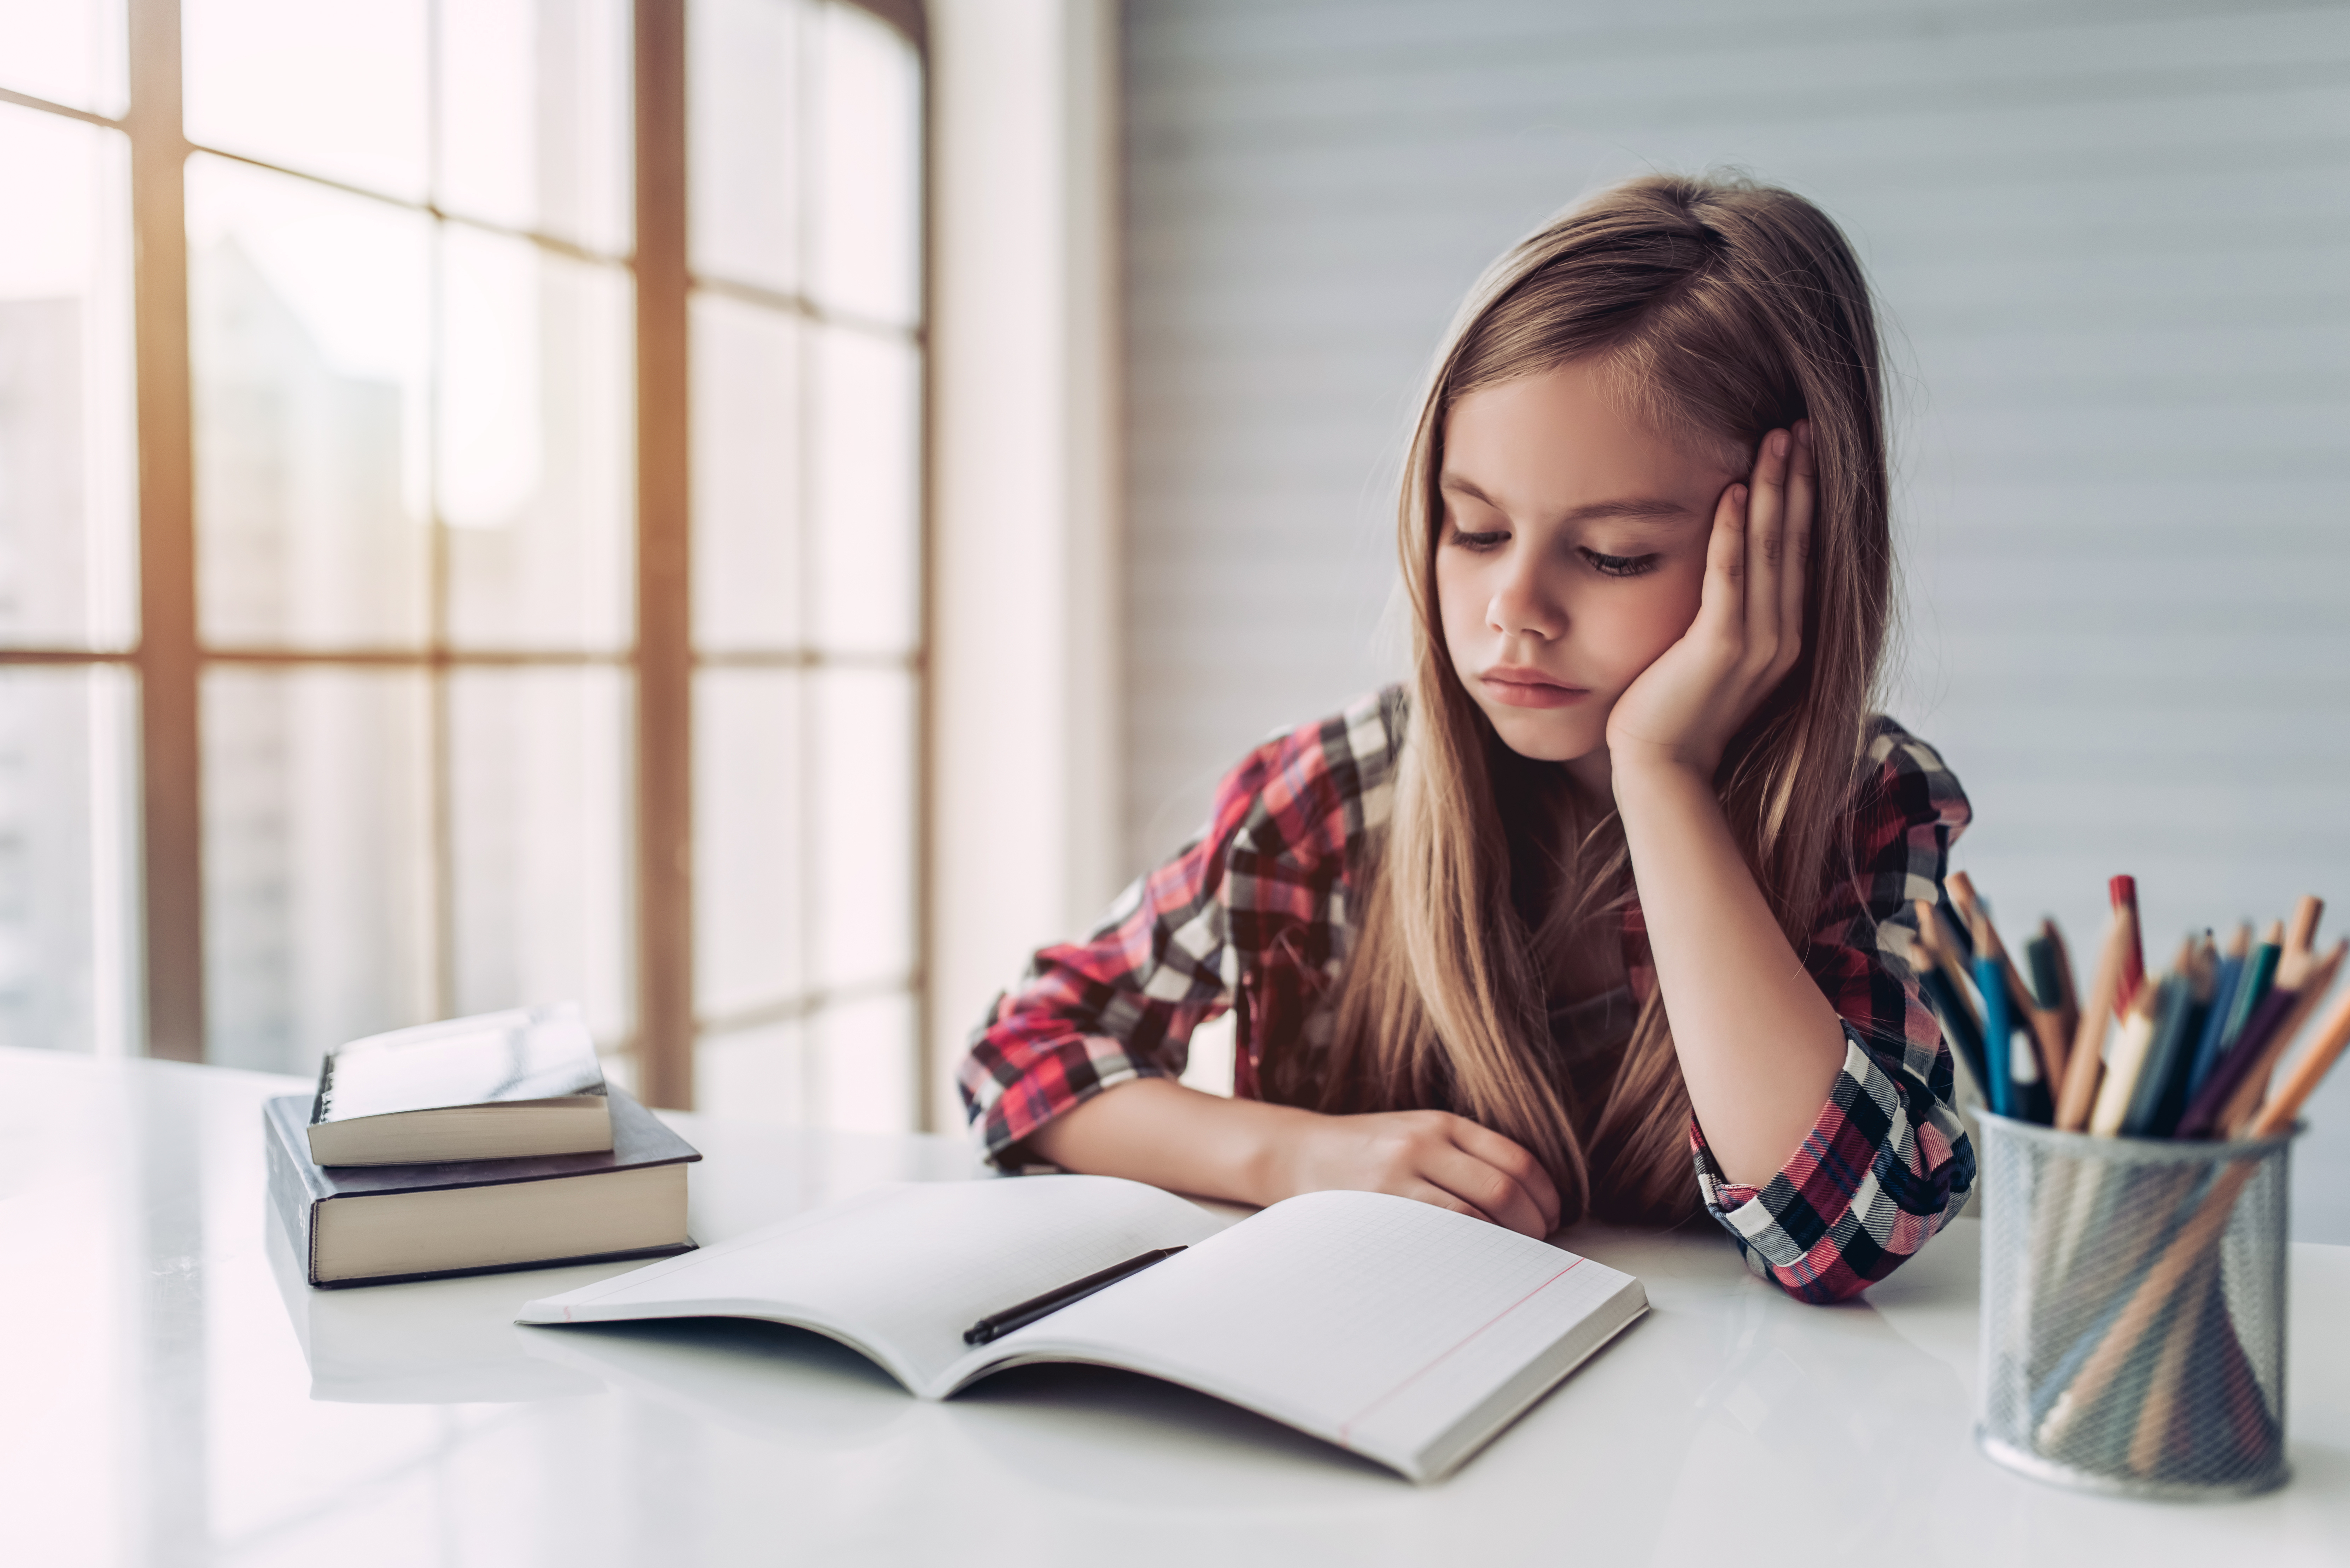 A young sad young girl staring at a book on her desk | Source: Shutterstock